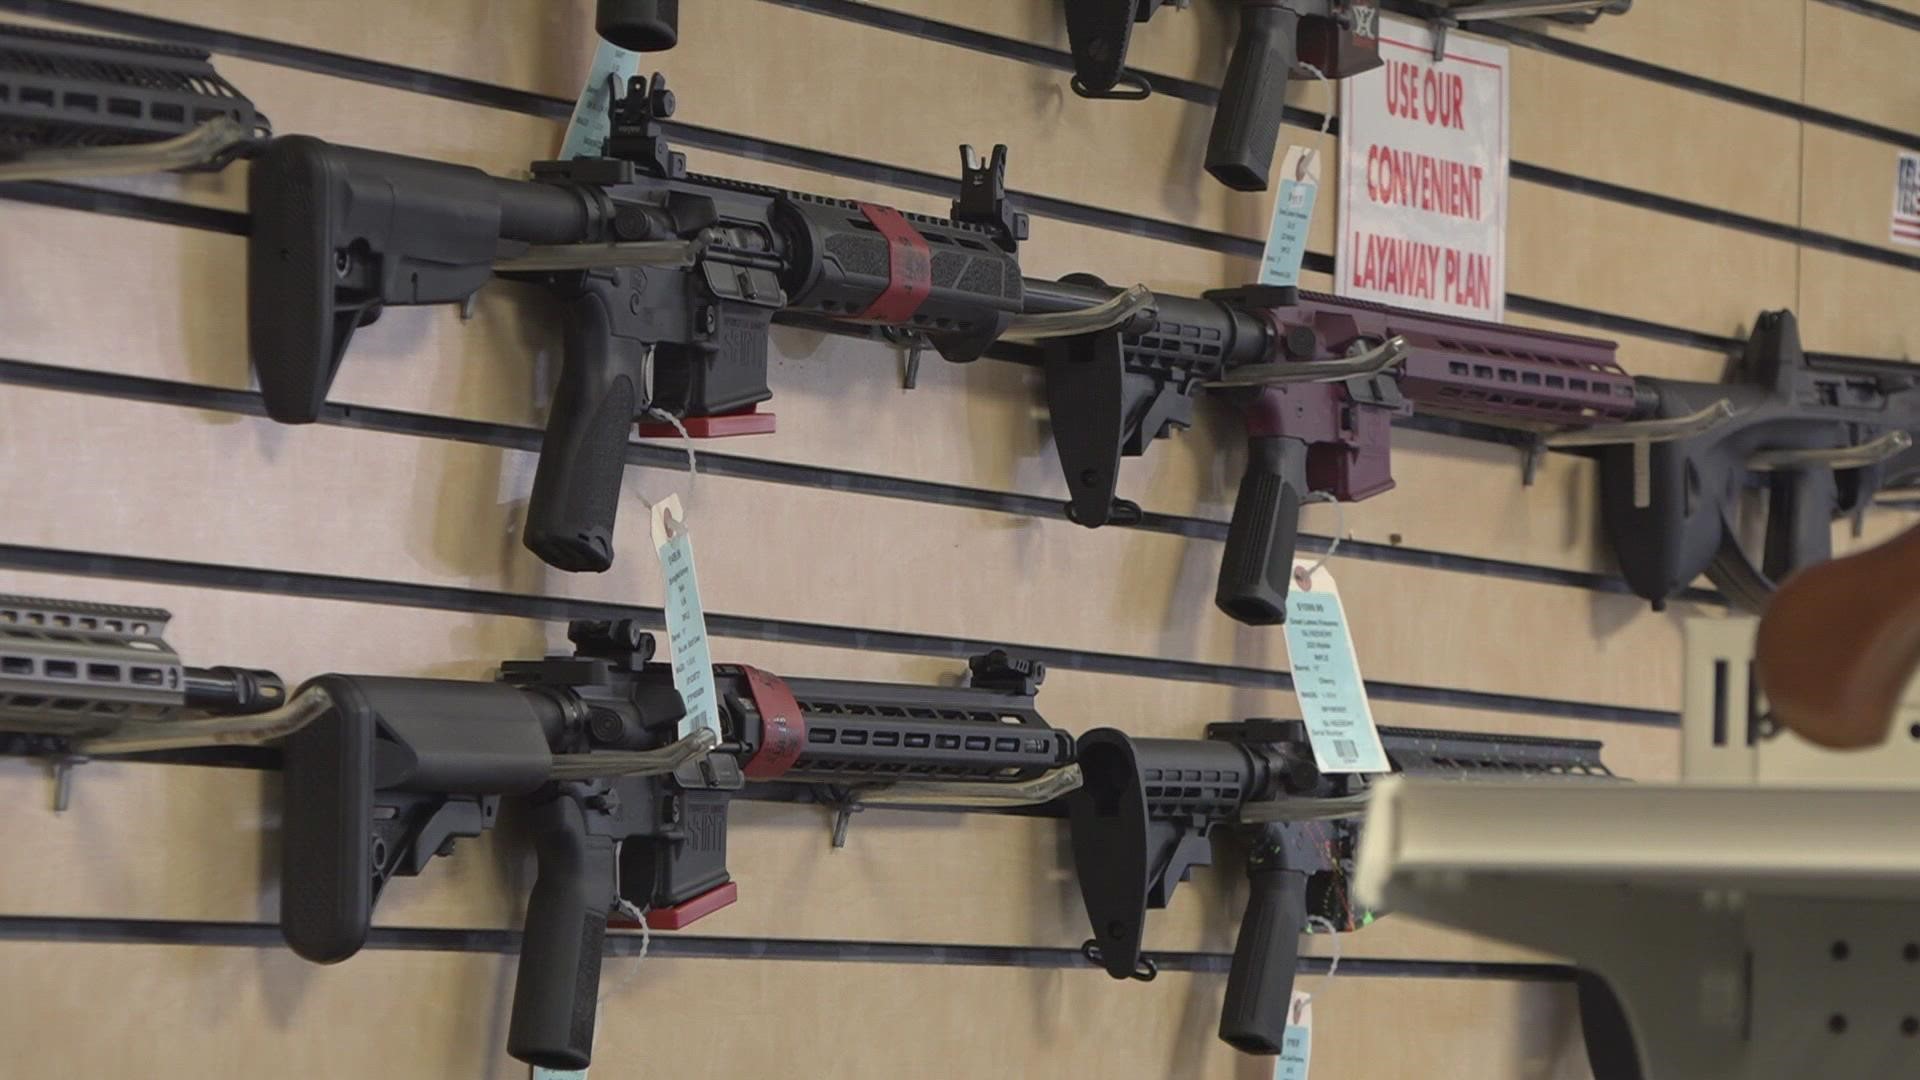 The legislation would ban the manufacture or possession of dozens of brands and types of rapid-fire rifles and pistols, .50-caliber guns and some attachments.